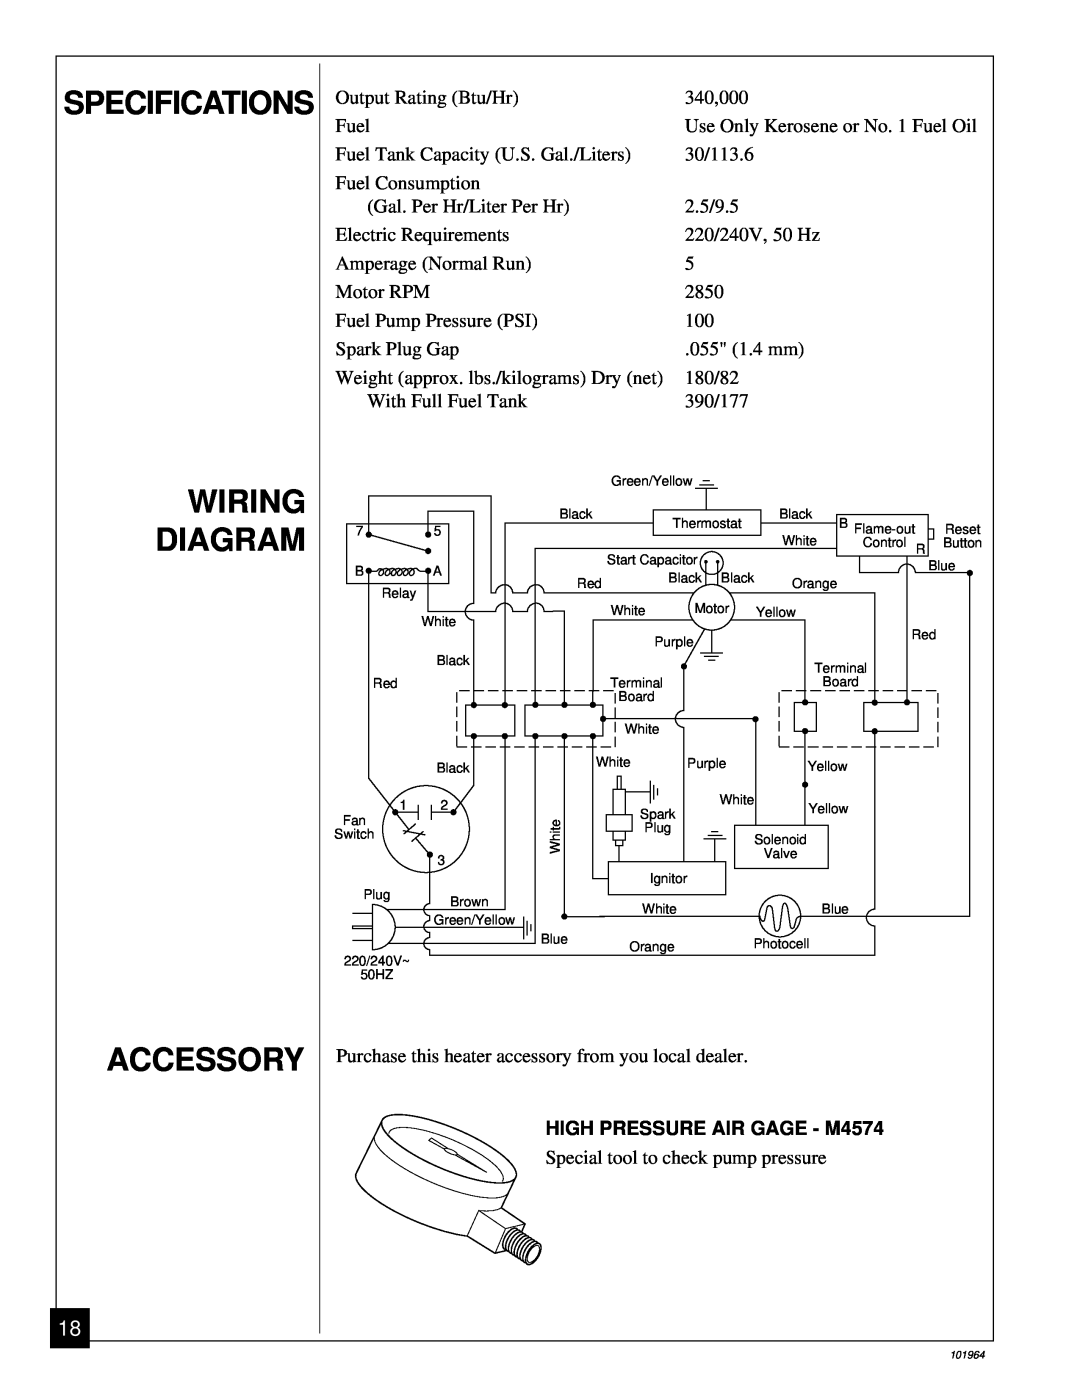 Desa B350CE owner manual Specifications Wiring Diagram Accessory, HIGH PRESSURE AIR GAGE - M4574 